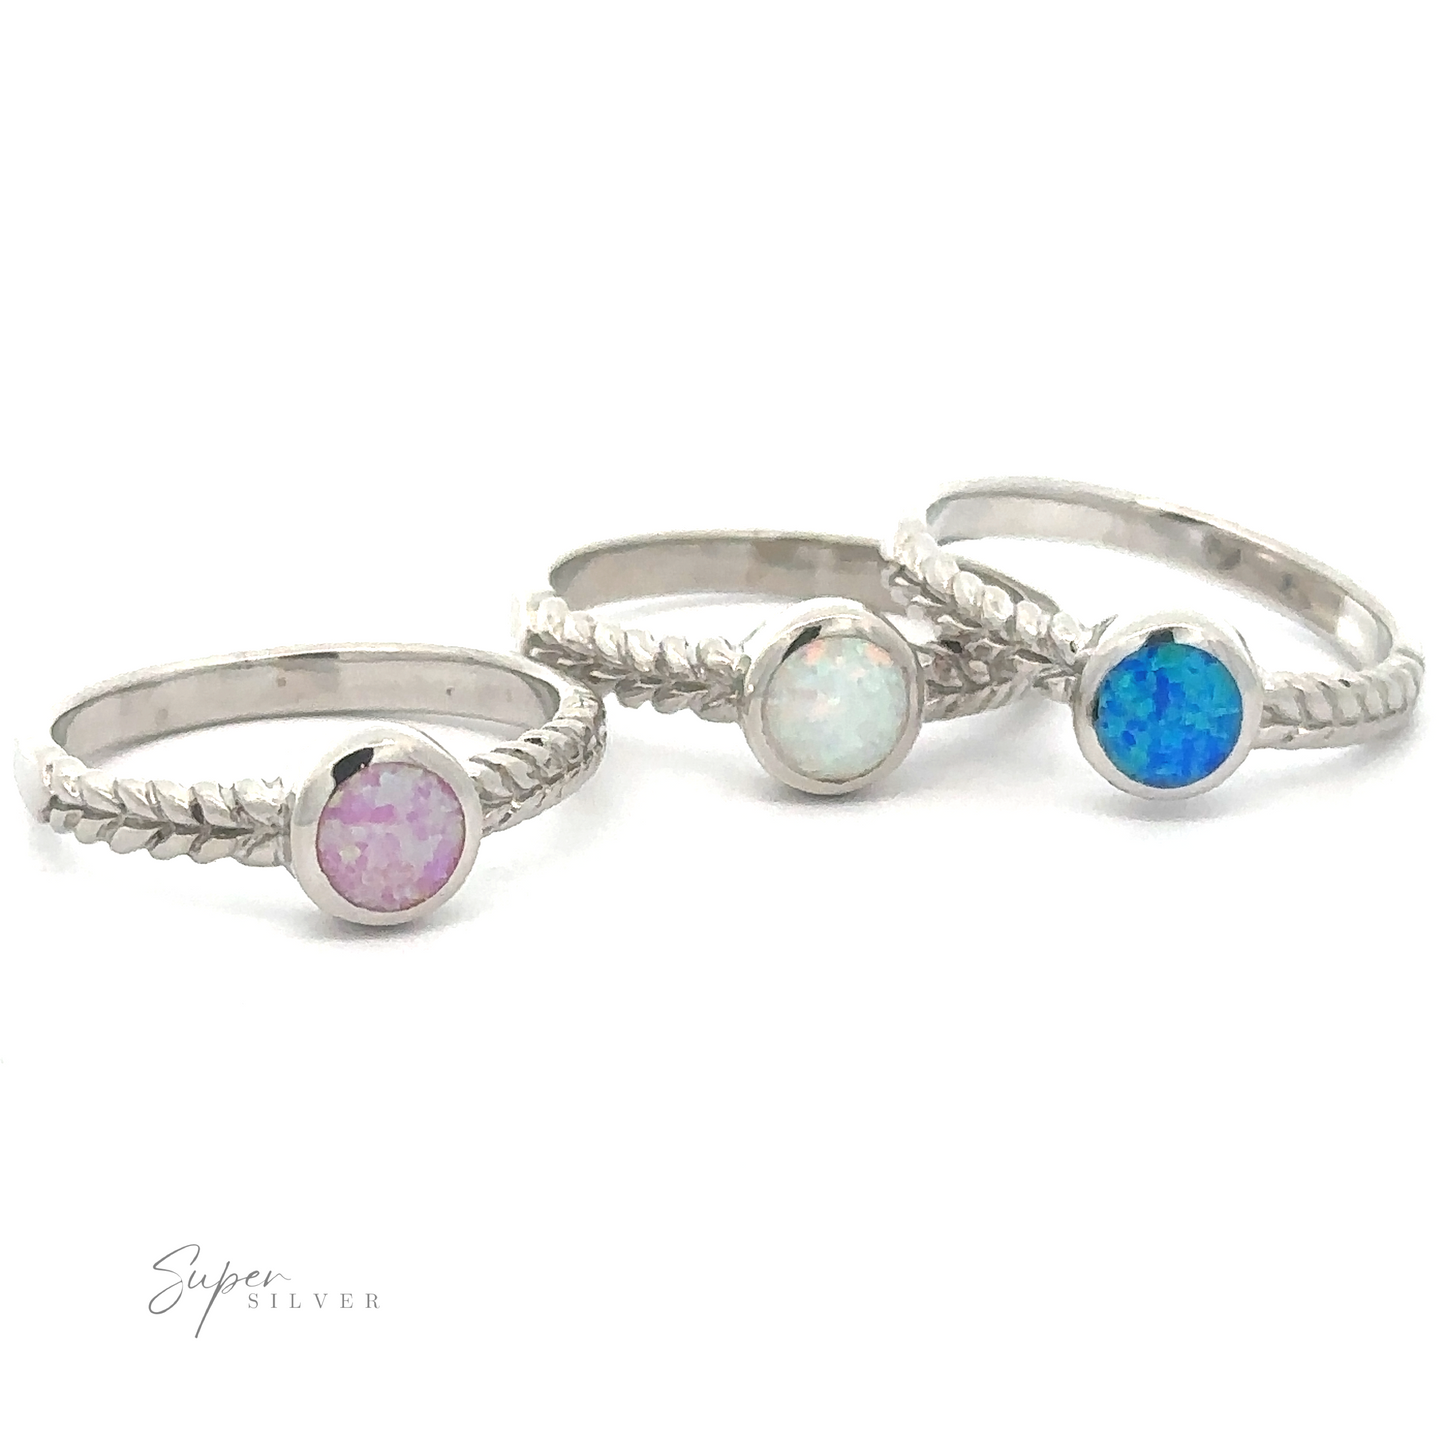 Three Half Braided Bands with Round Opal gemstones of different colors on a white background.